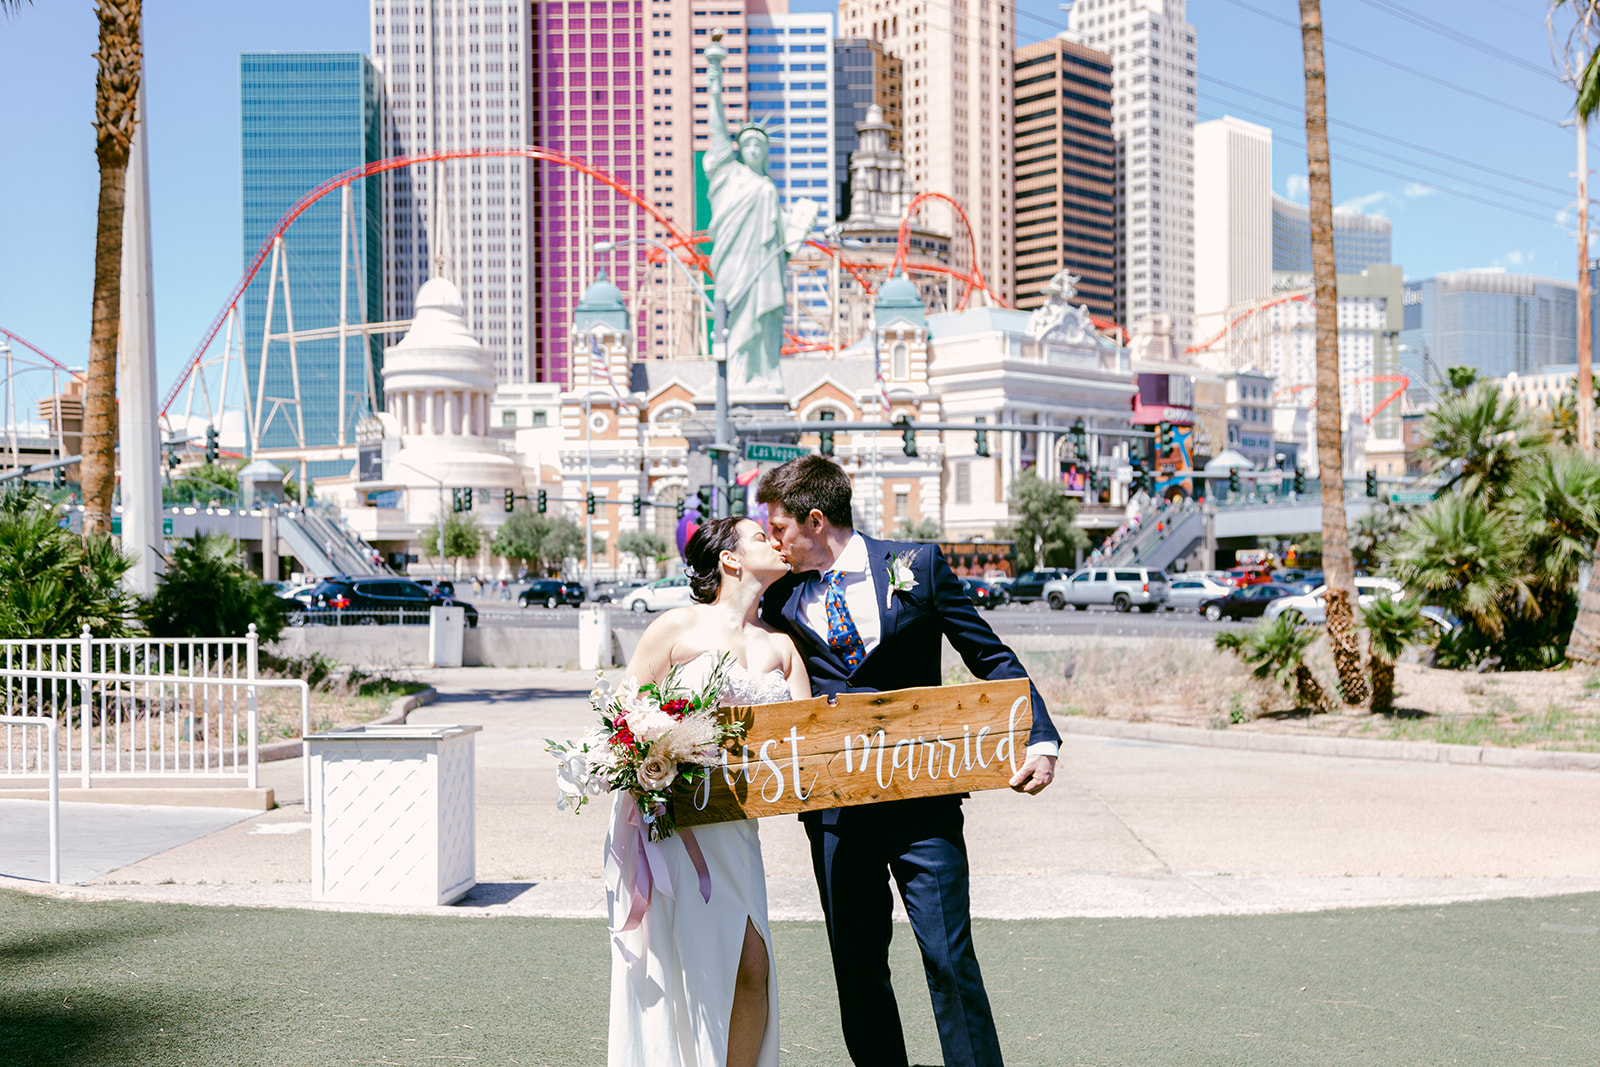 Bride and groom sharing a kiss as they hold up Just Married sign during their elopement arranged by Elopement Las Vegas